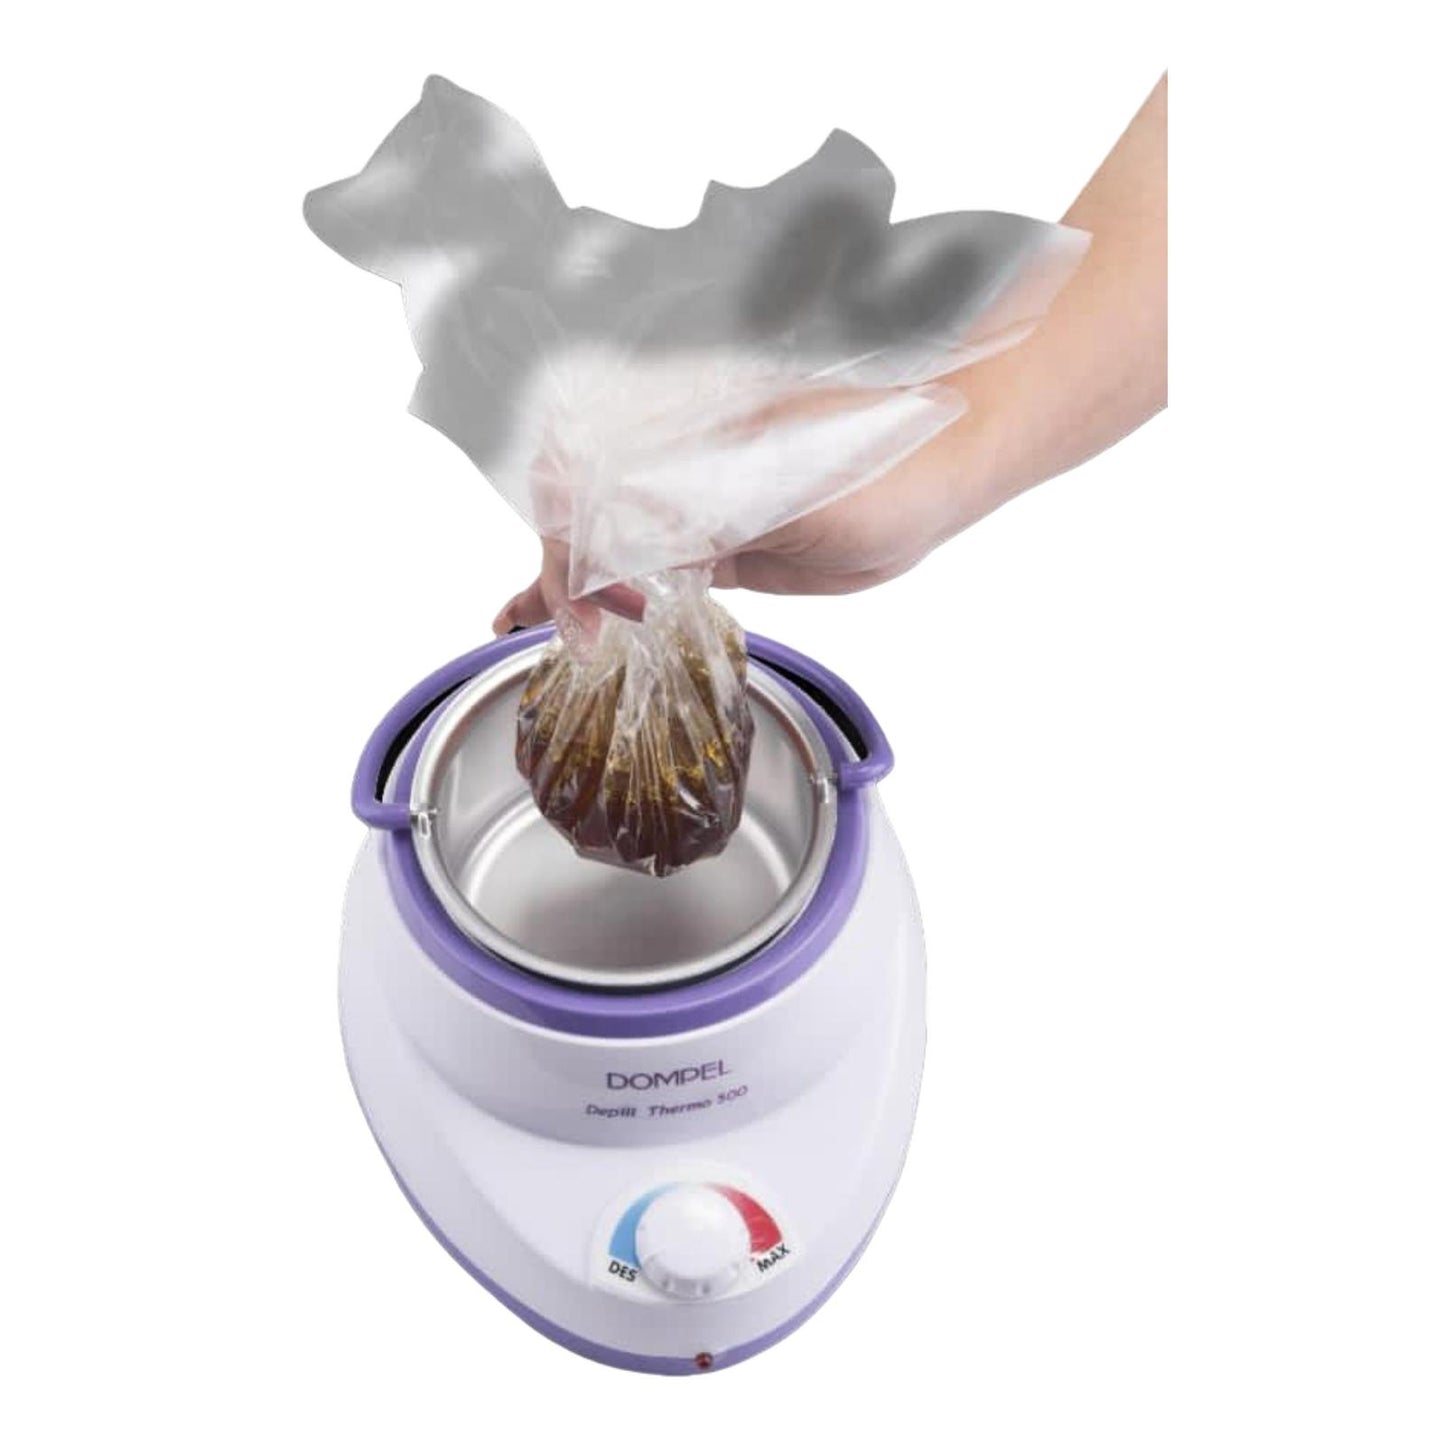 Hand inserting a plastic bag of wax into a Dompel wax warmer, preparing for the waxing process.